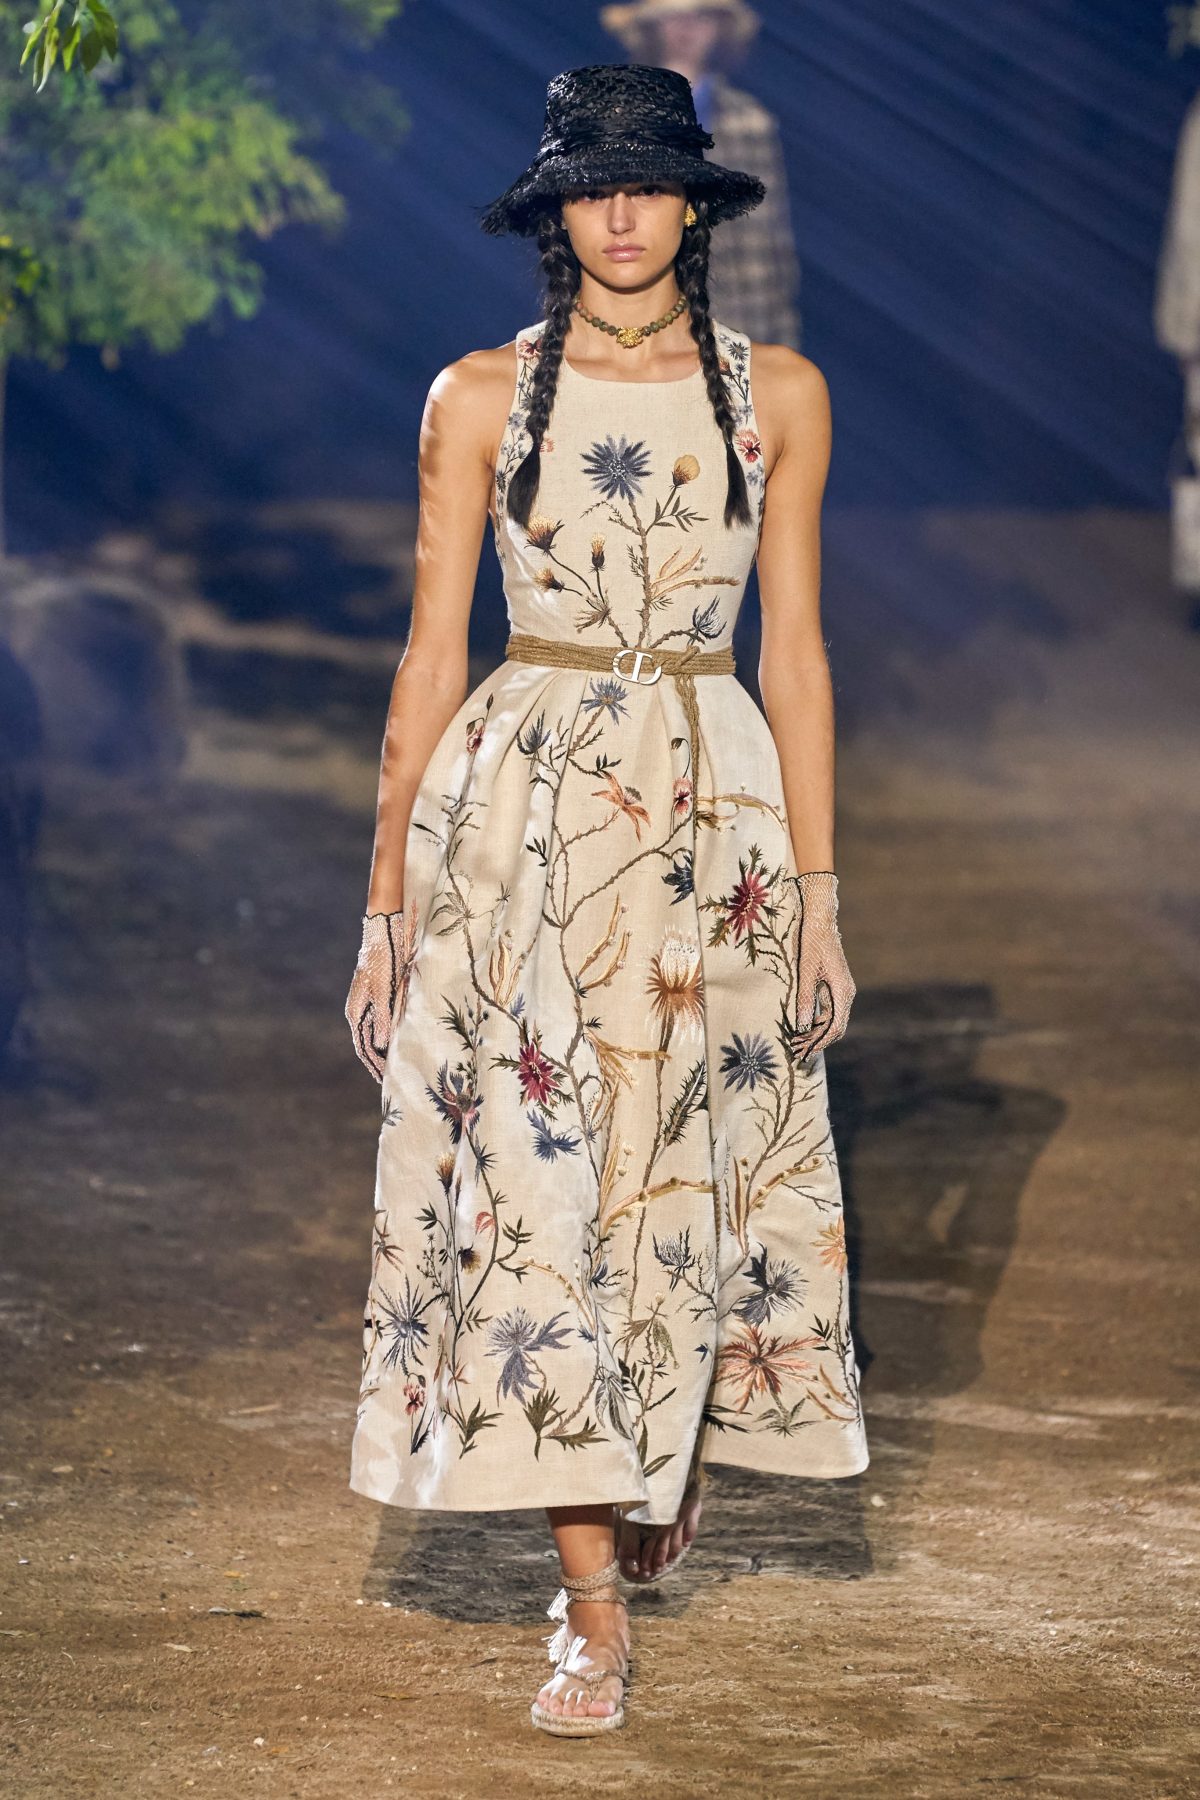 Christian Dior Spring/Summer 2020 Ready-to-Wear Show Review